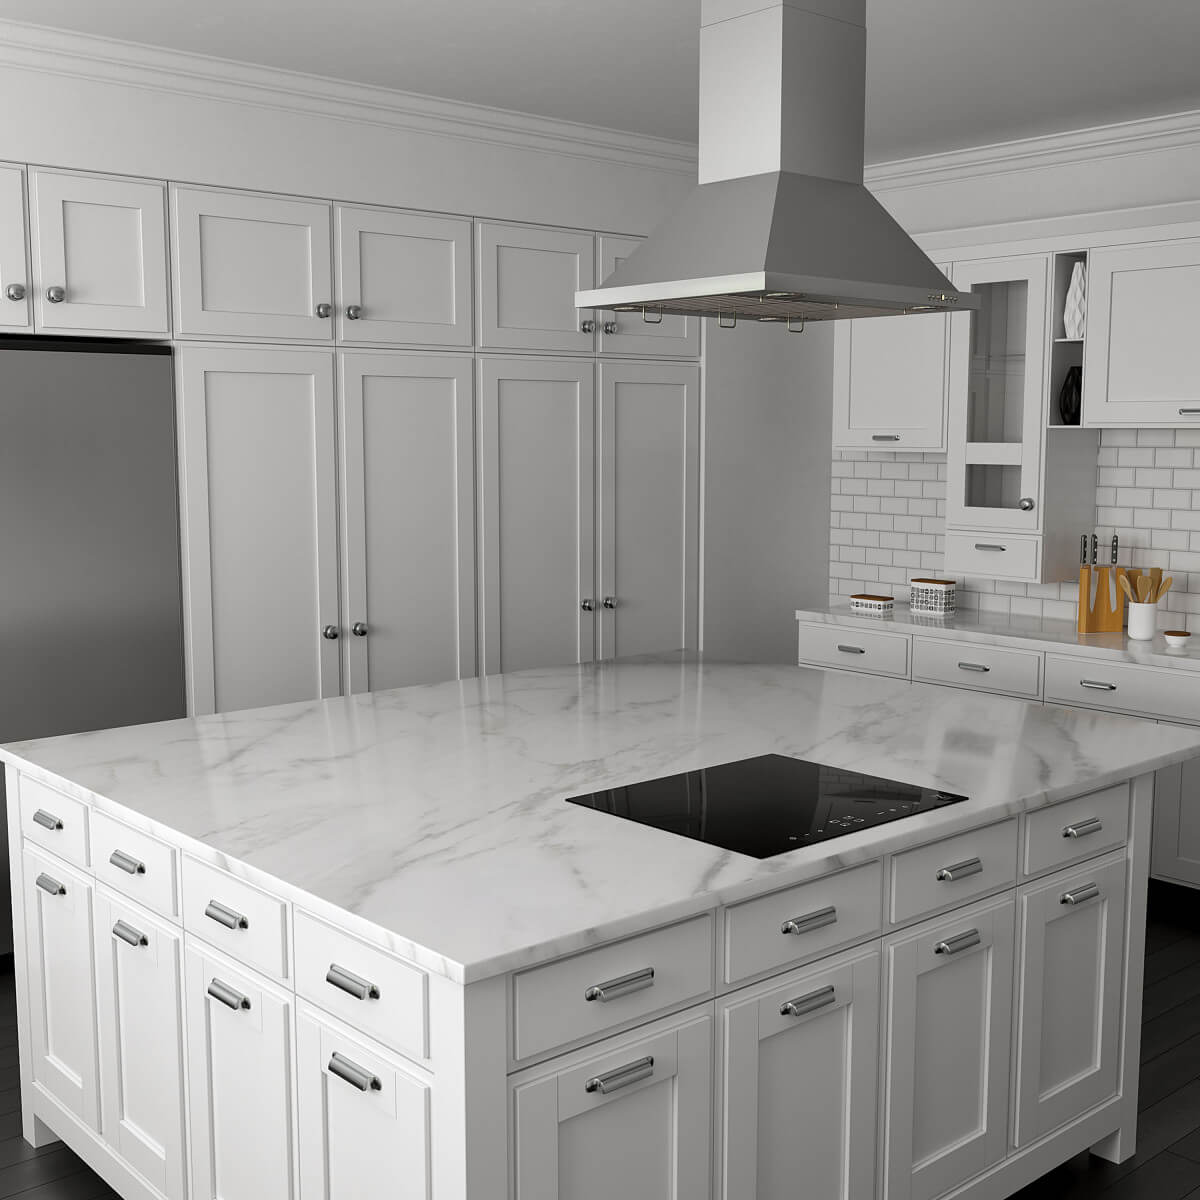 ZLINE induction cooktops in white marble kitchen with island range hood